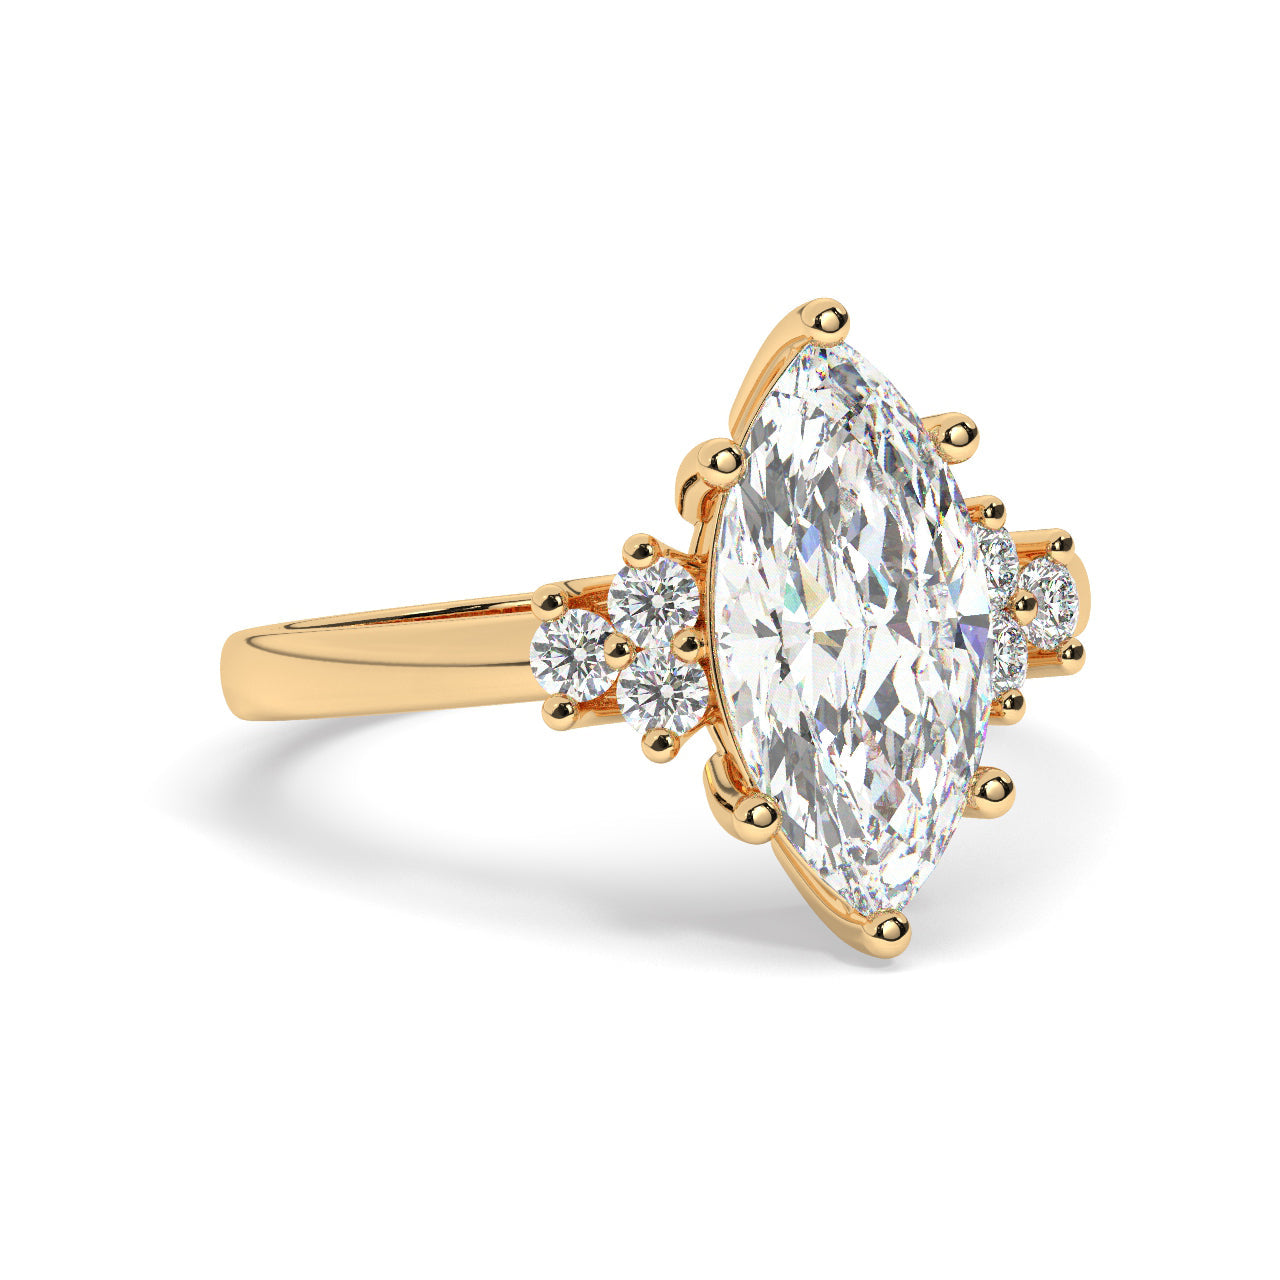 Yellow Gold Marquis Cut Engagement Ring Accompanied by Round Stones - Rotated View